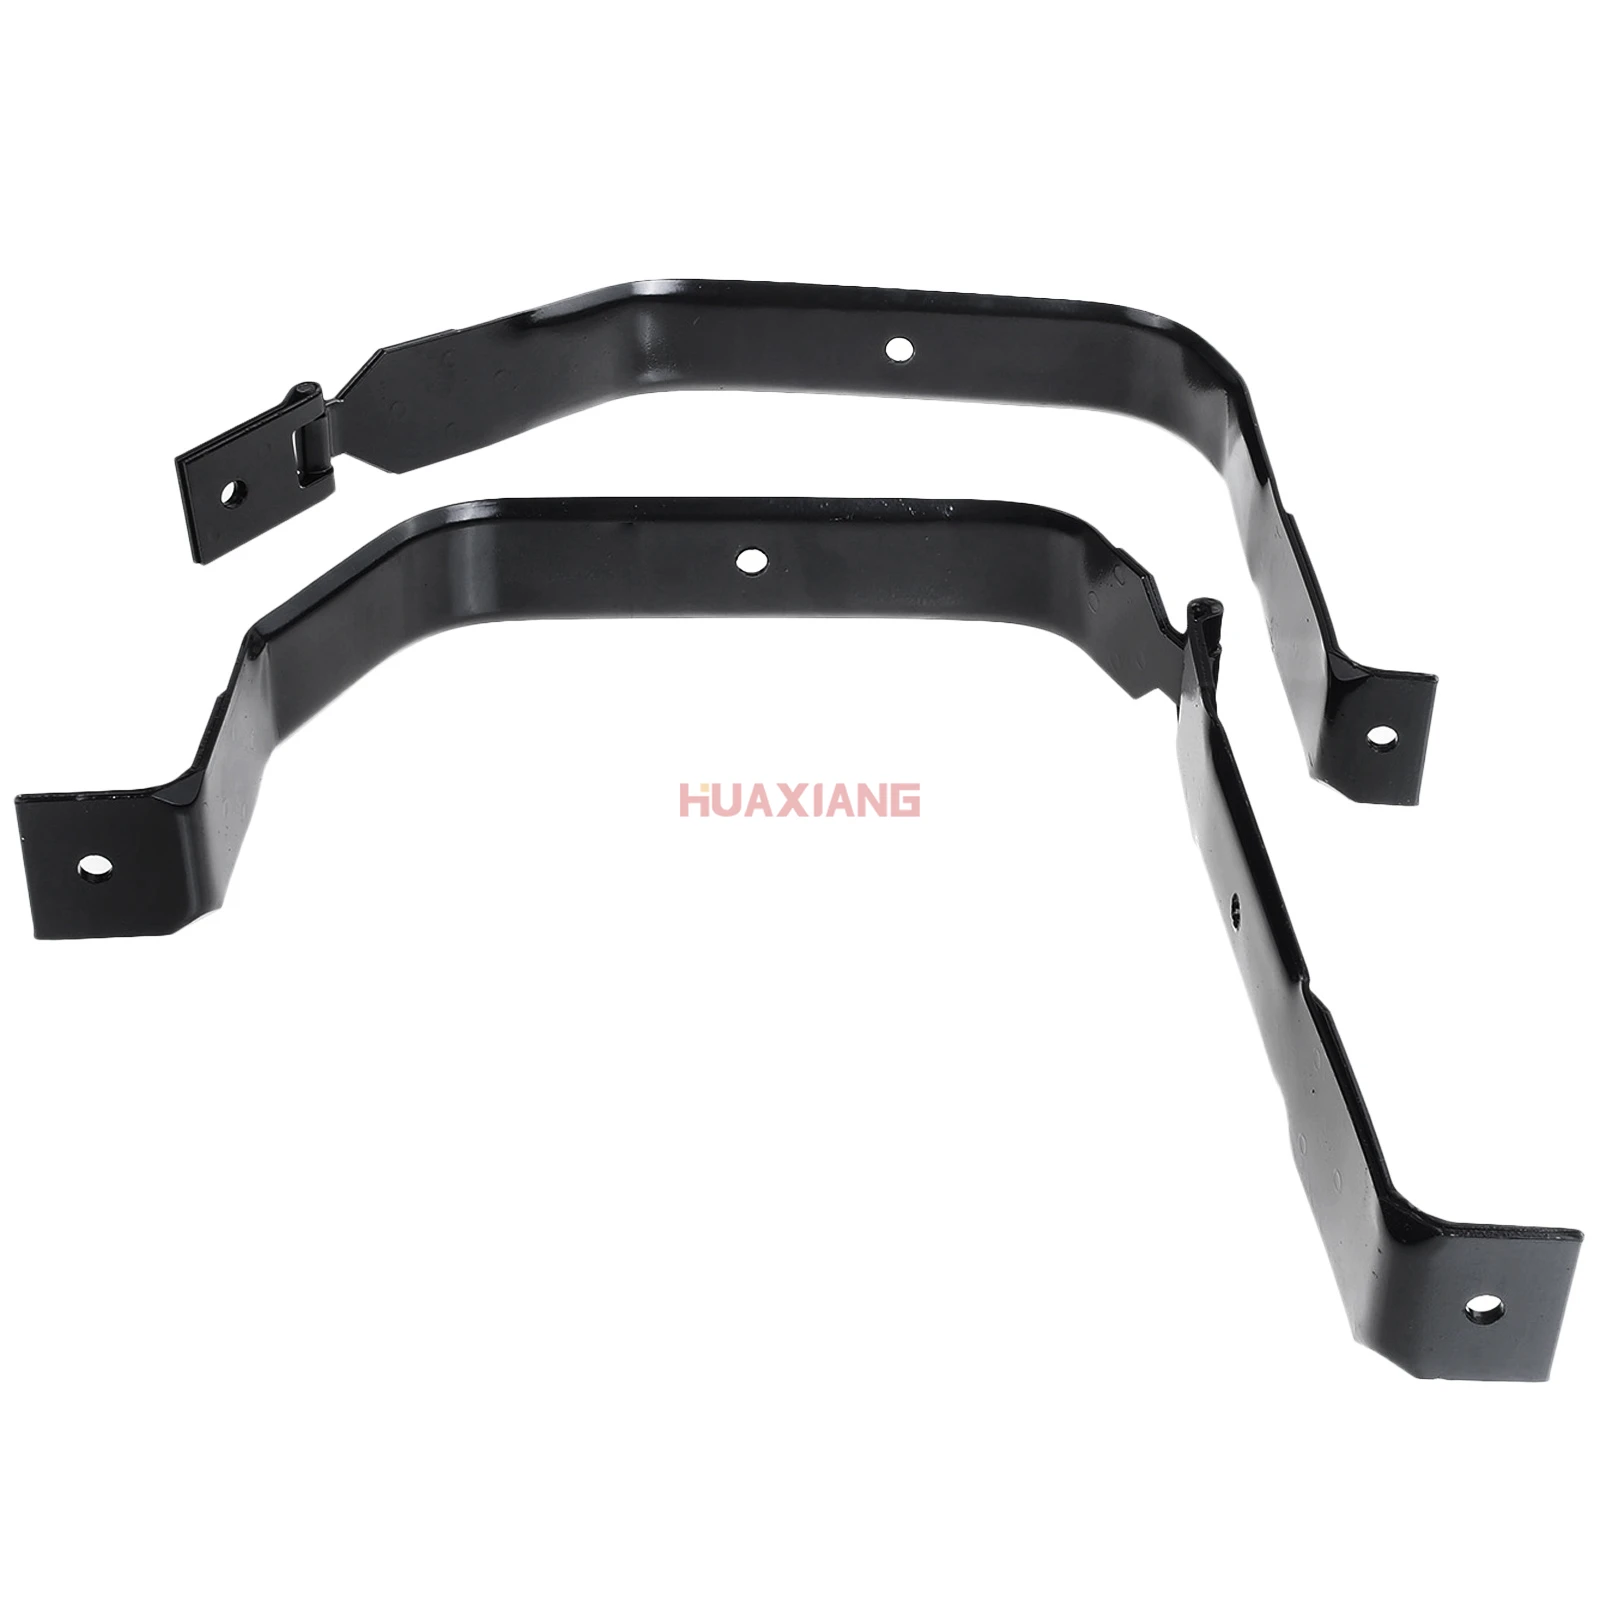 

Quality Auto Part Germany Spot Goods 2x Fuel Tank Strap for Ford F-250 350 Super Duty 2011 2012-2016 V8 6.7L Diesel